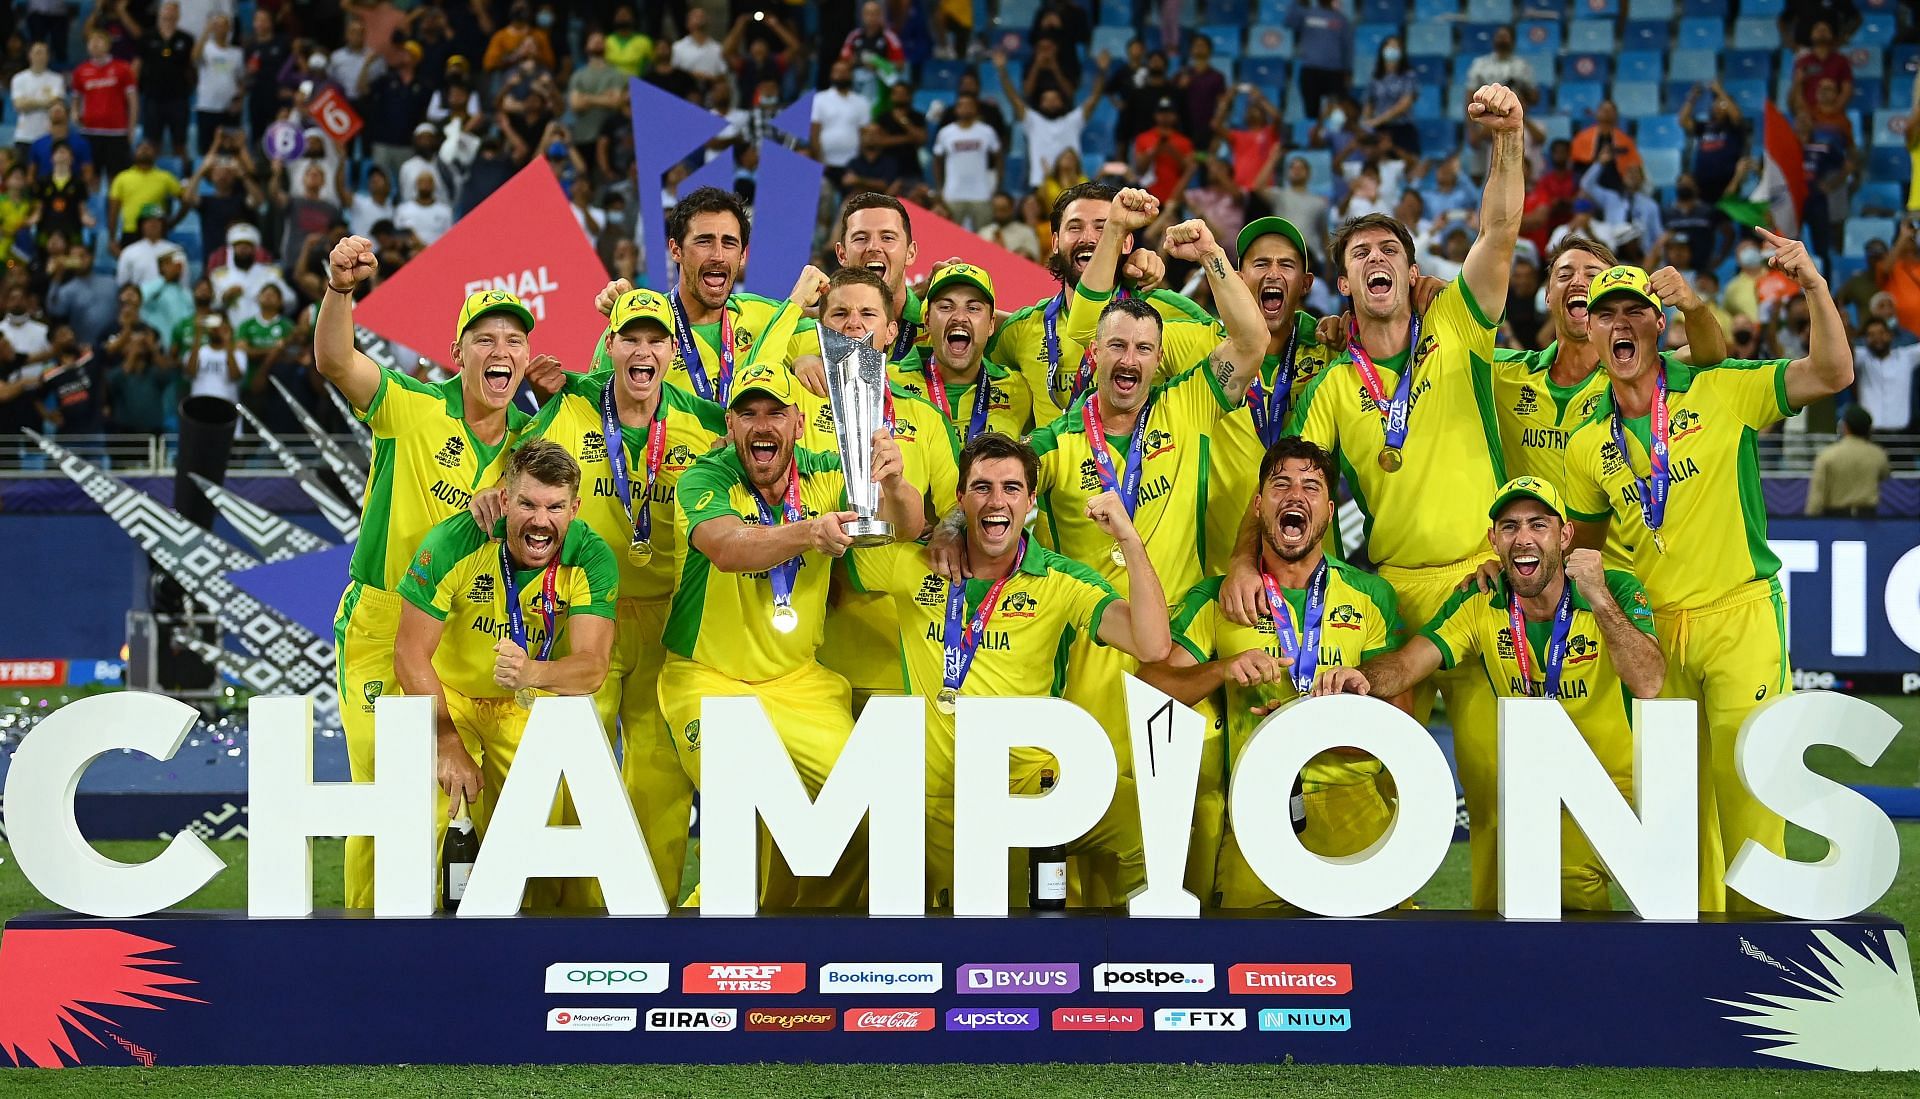 The virtues behind Australia's success at this year's T20 World Cup